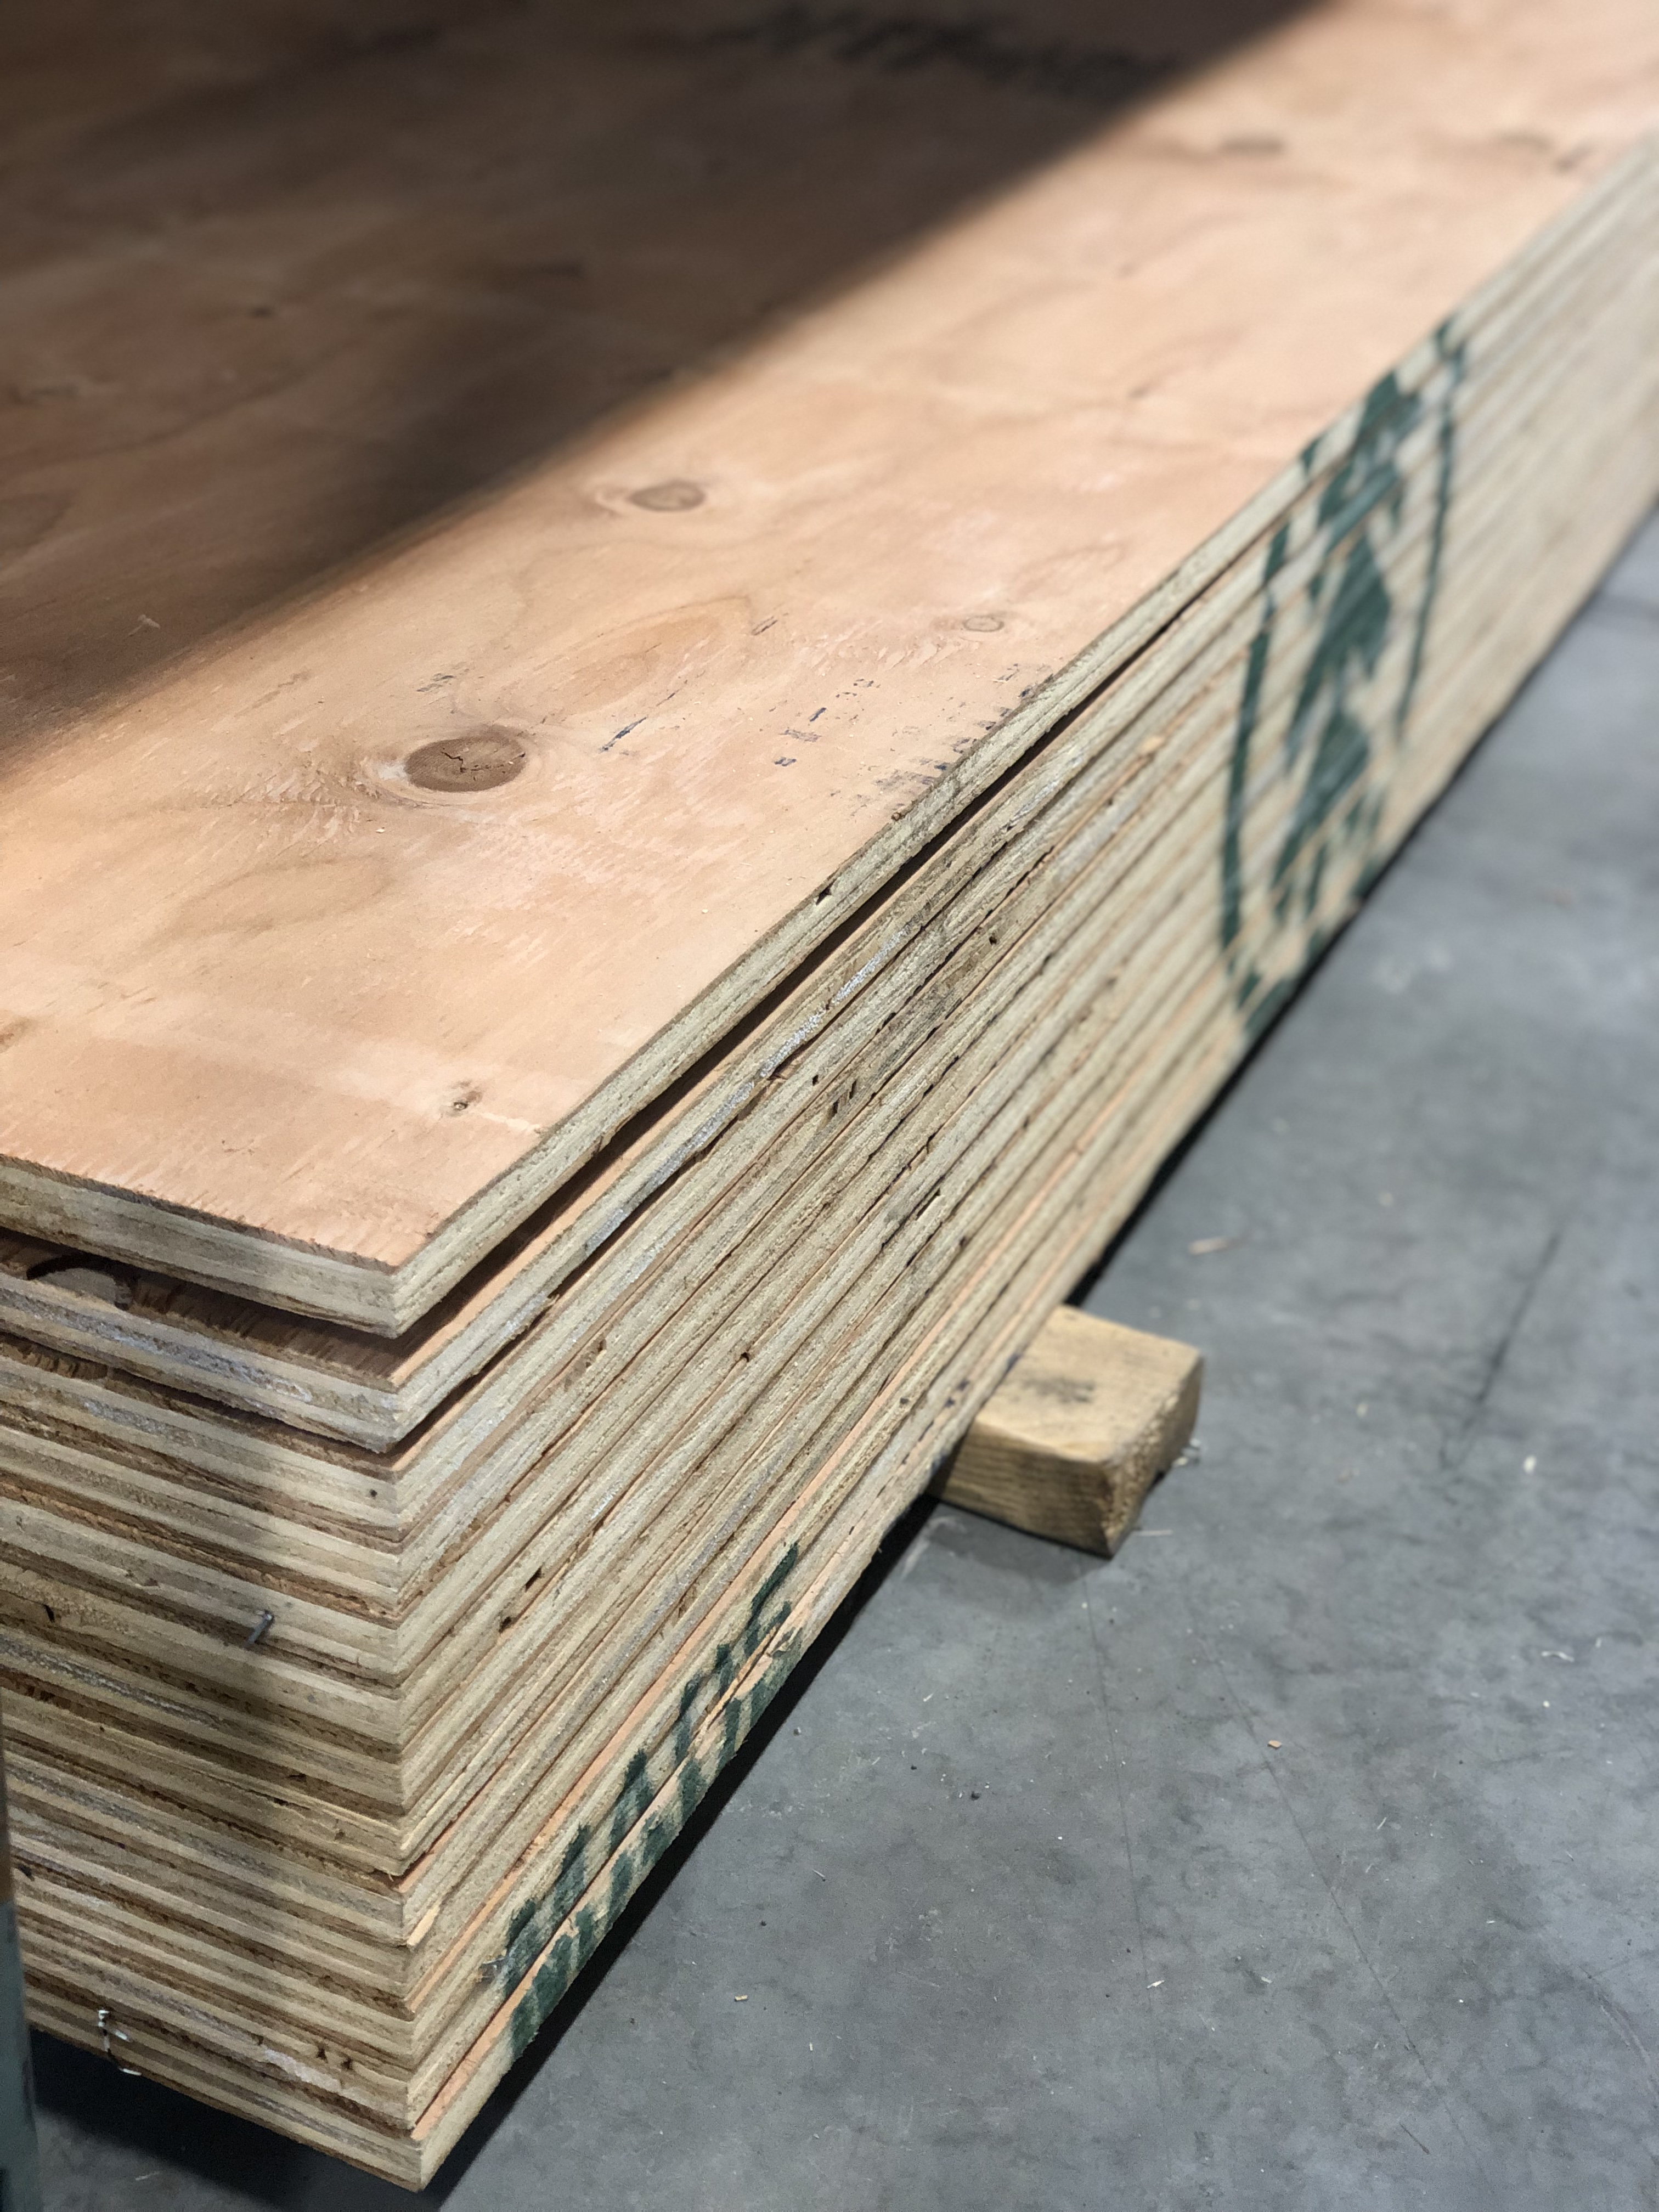 What Is Fire Retardant Plywood and Its Uses